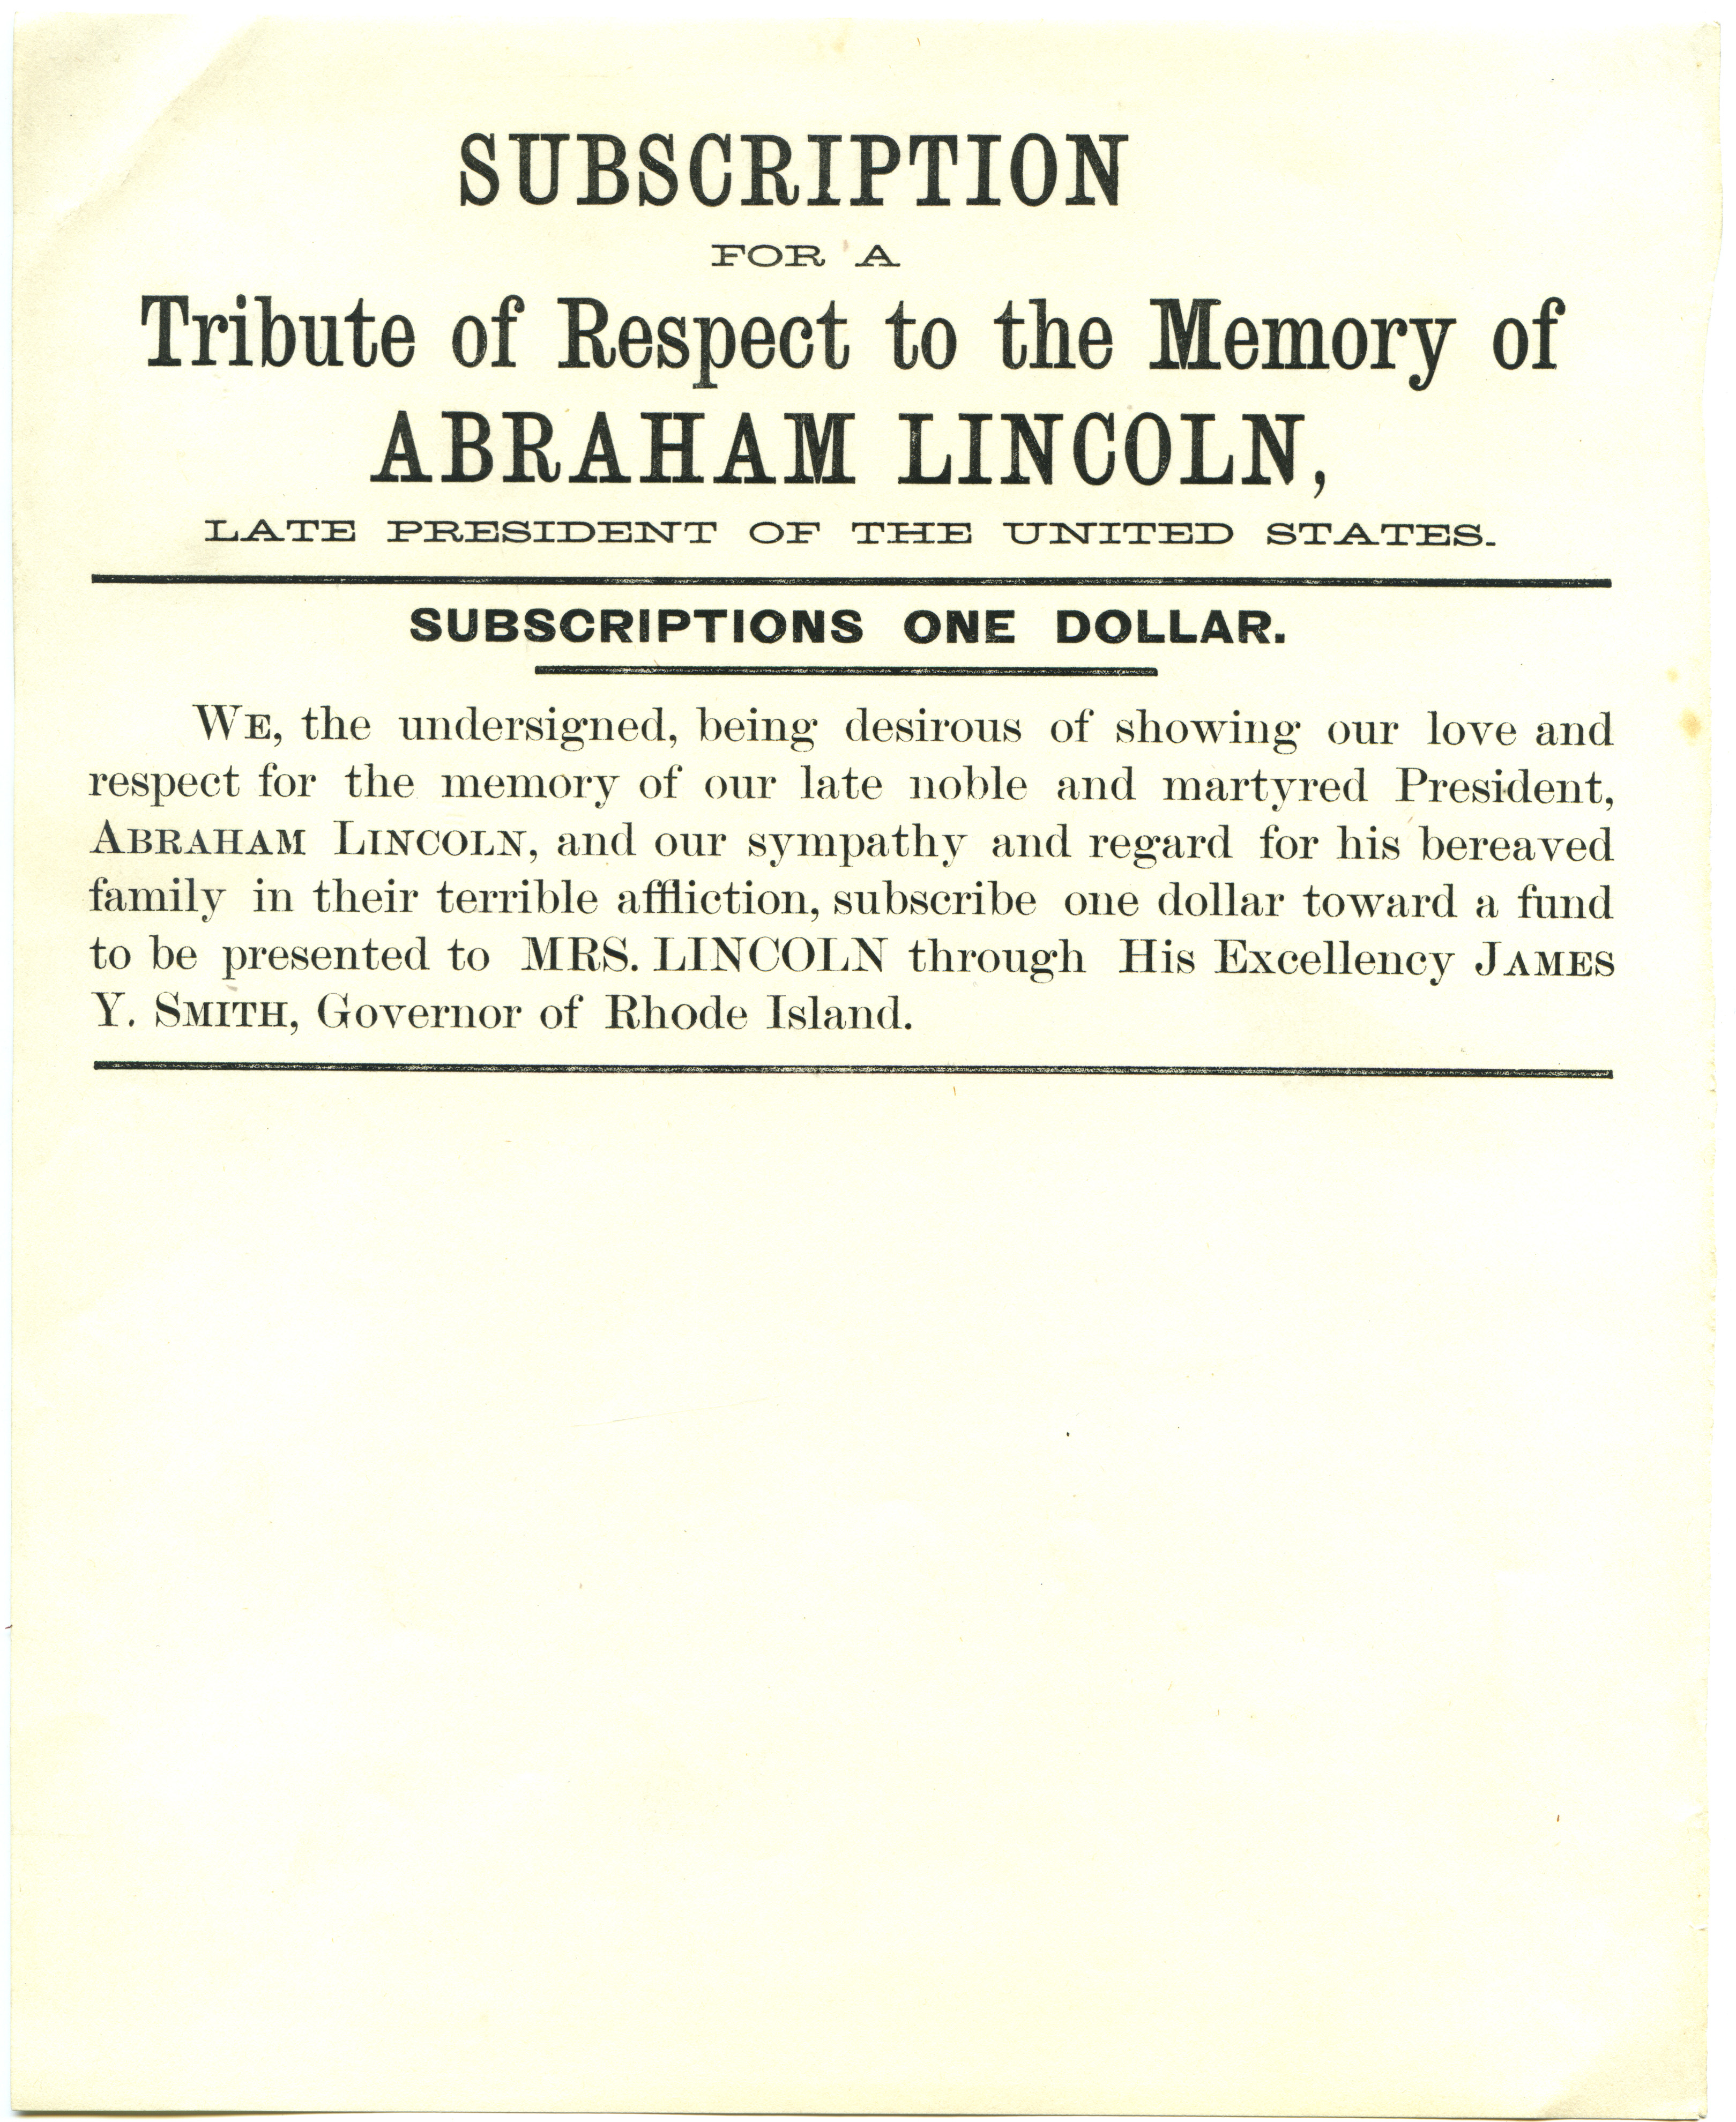 Subscription for a Tribute of Respect to the Memory of Abraham Lincoln, Late President of the United States